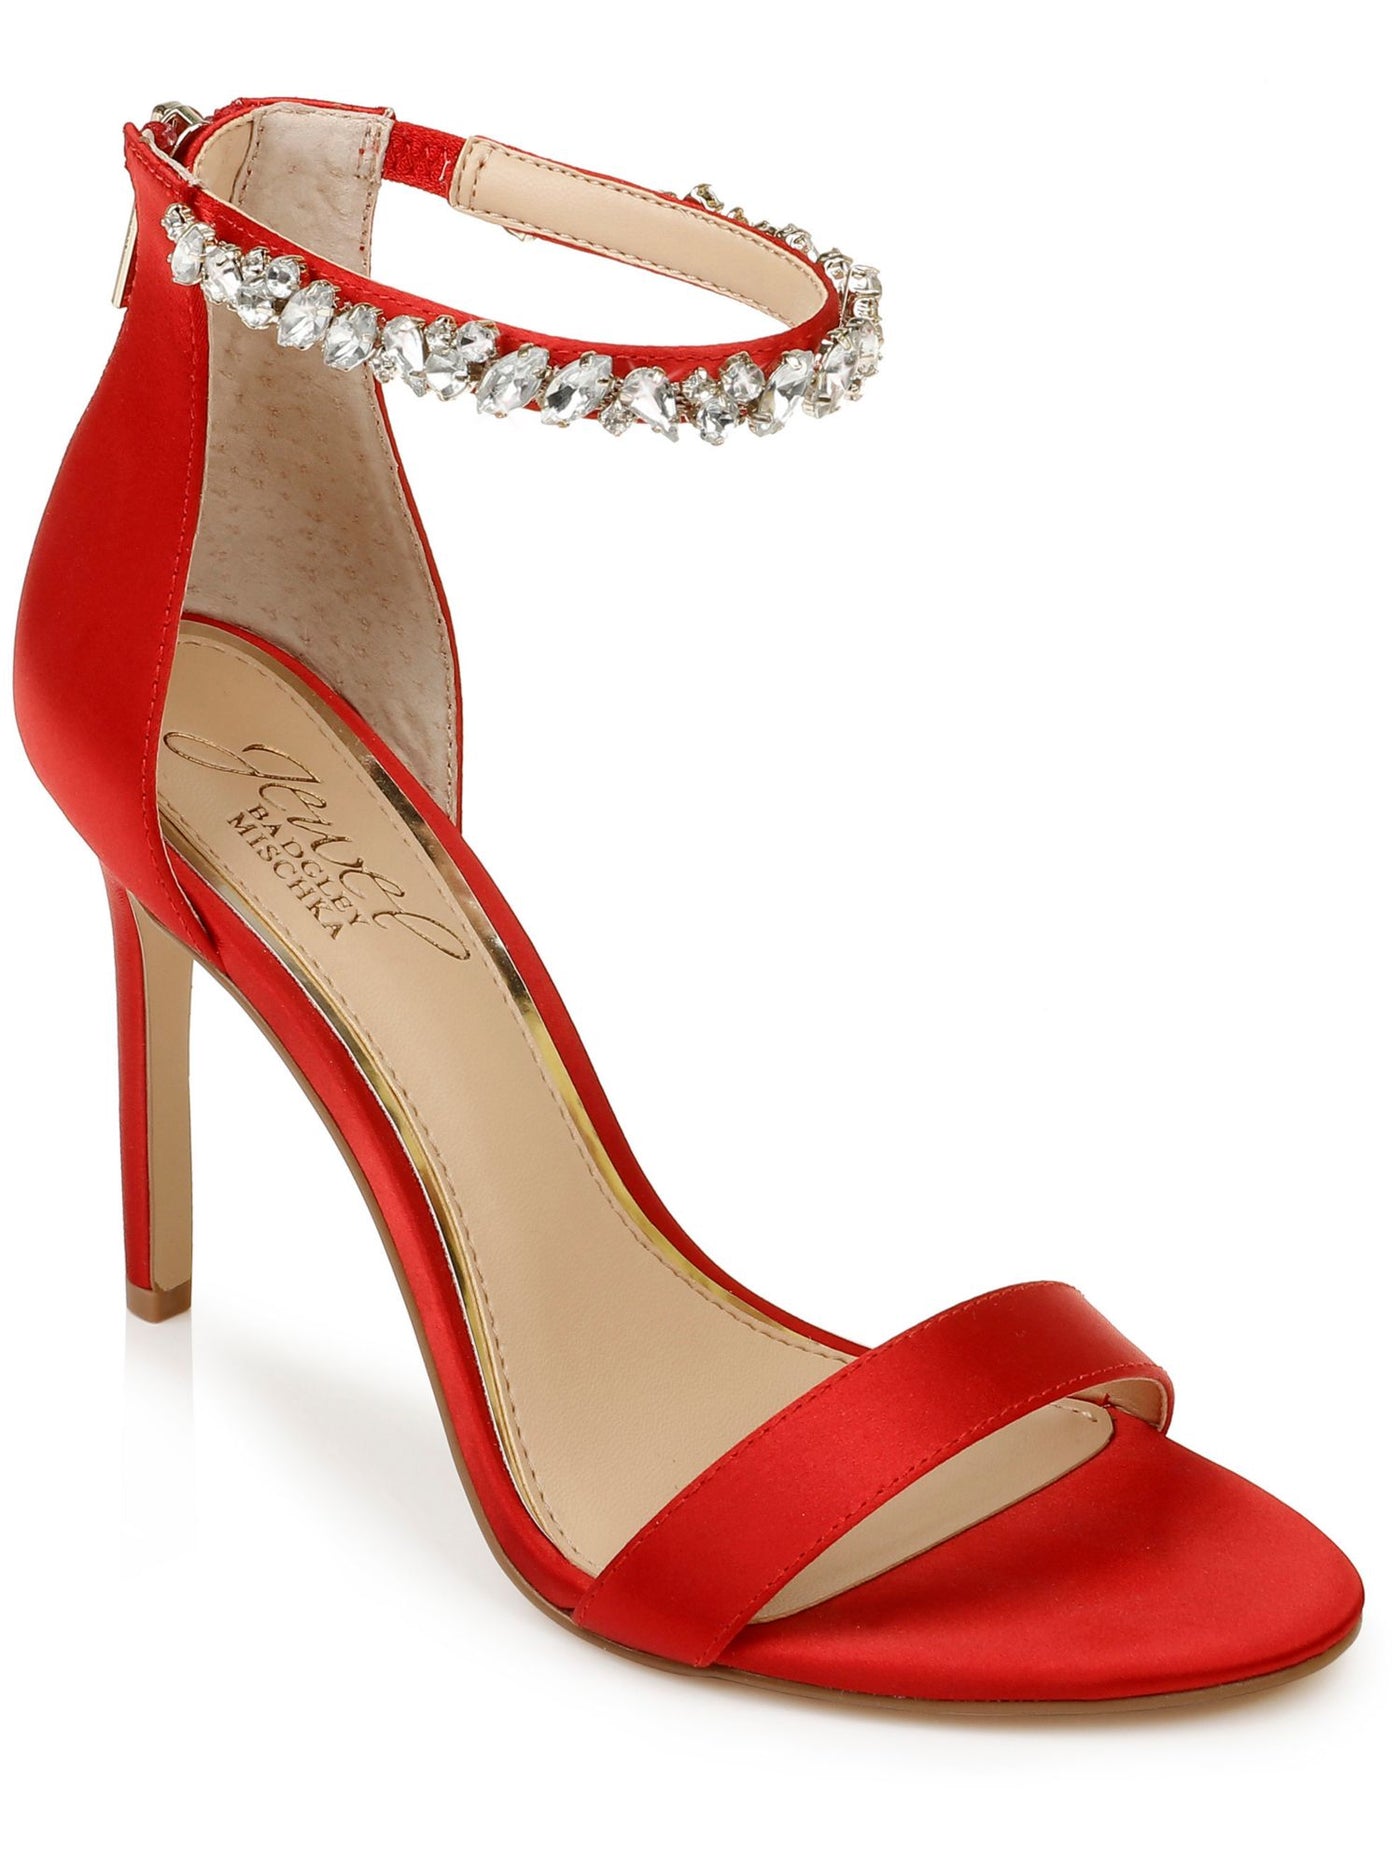 JEWEL BADGLEY MISCHKA Womens Red Ankle Strap Embellished Unique Round Toe Stiletto Zip-Up Dress Sandals Shoes 8.5 M